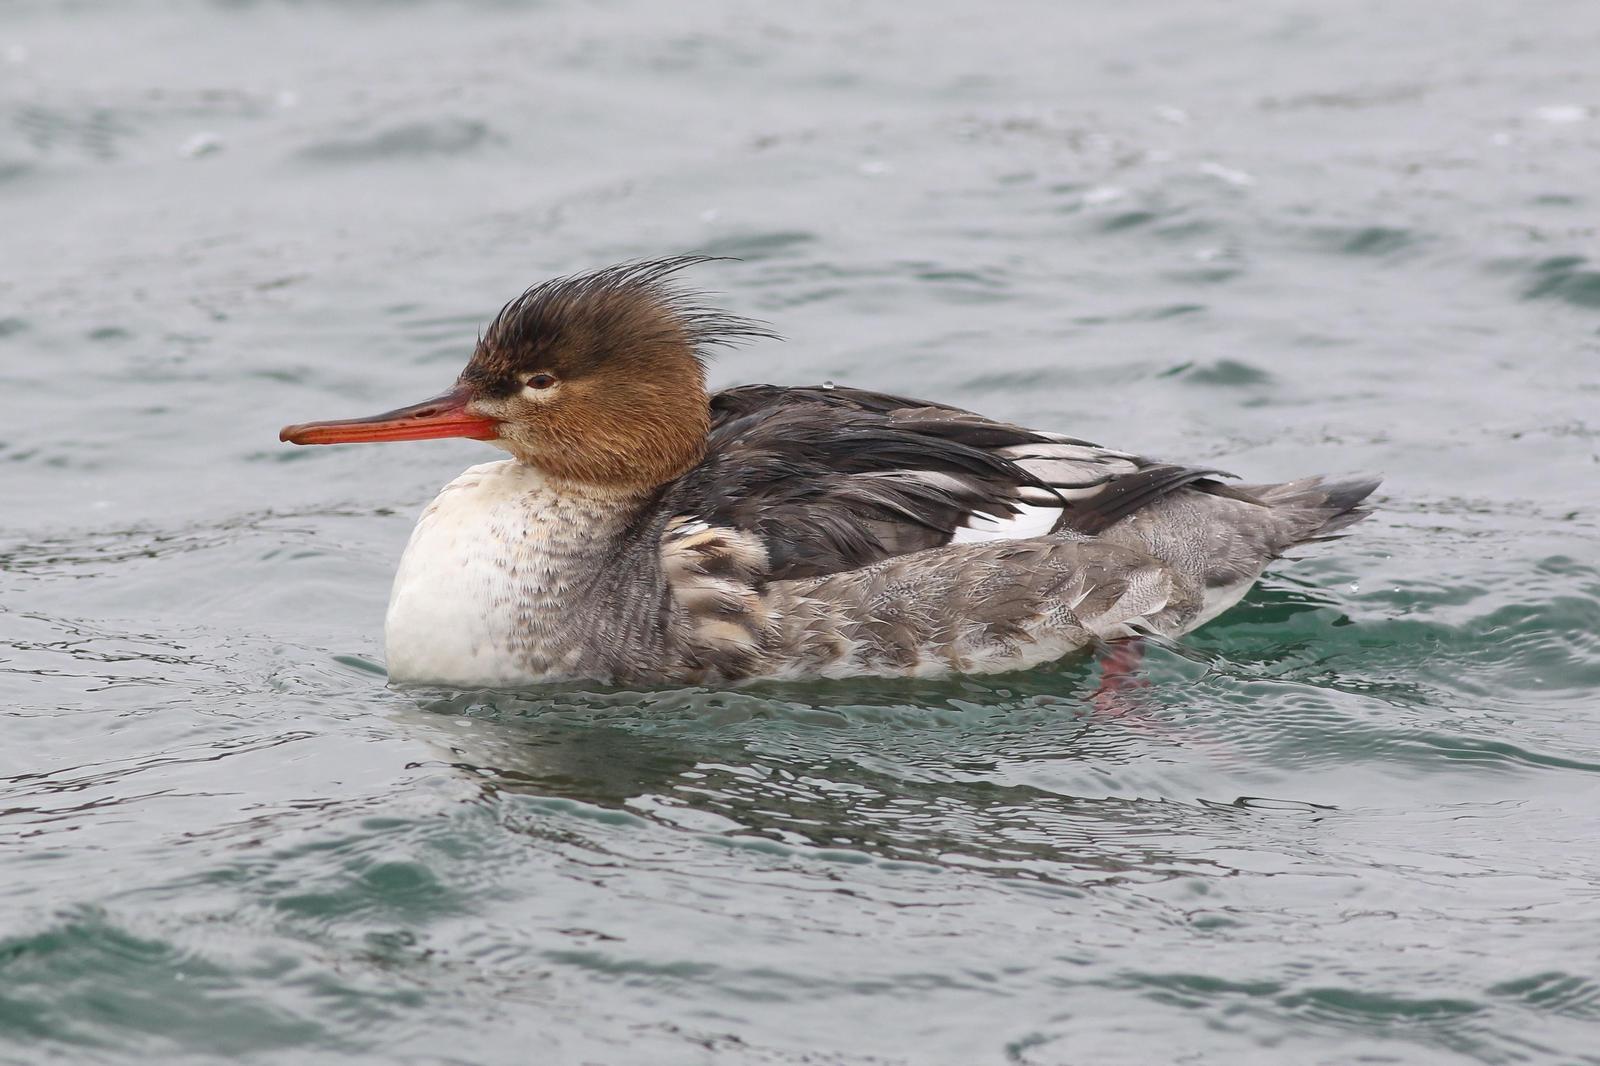 Red-breasted Merganser Photo by Tom Ford-Hutchinson